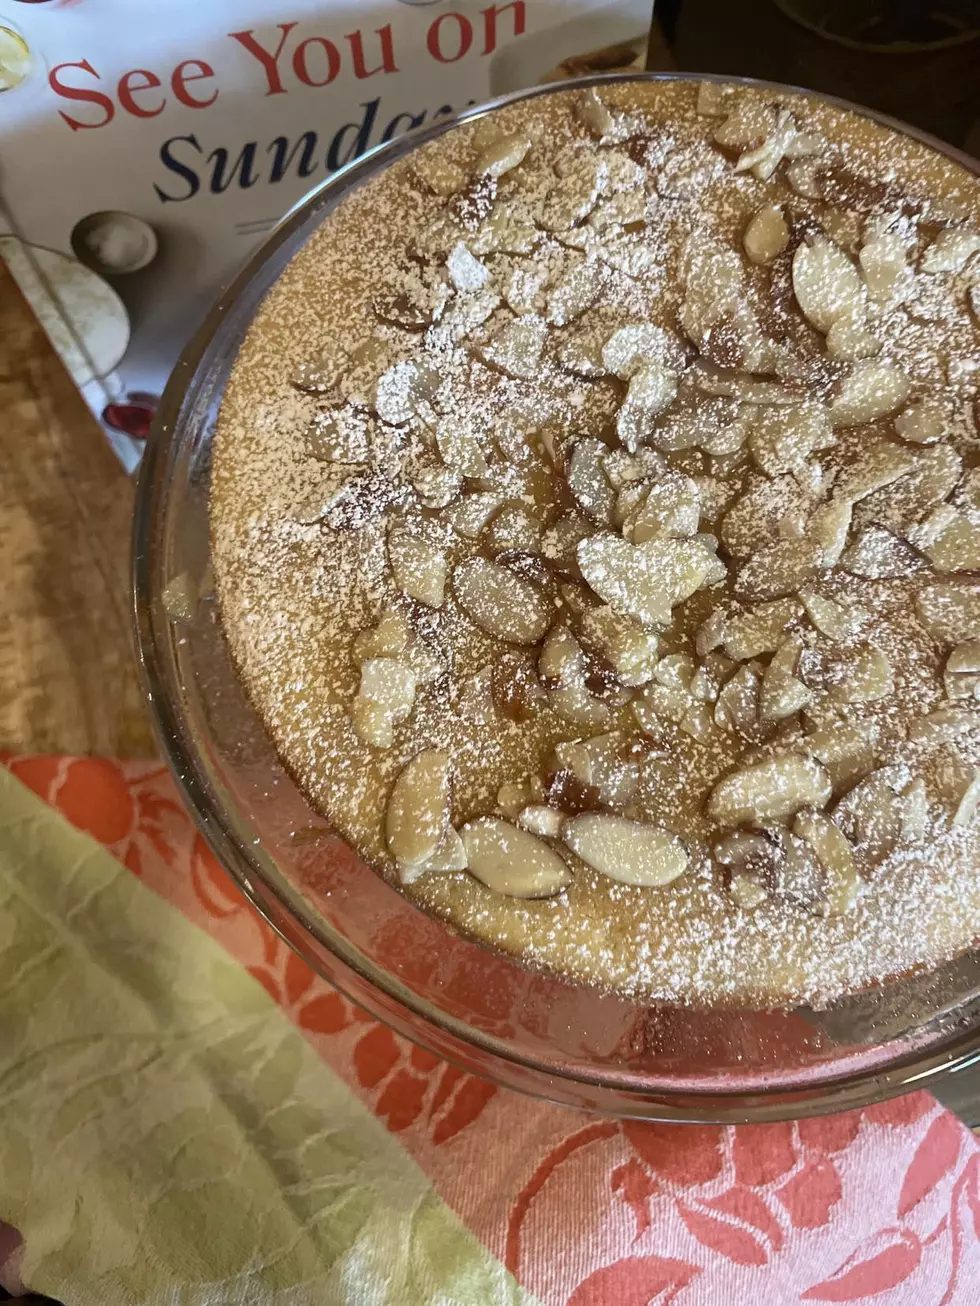 If You ‘Feel Like a Nut,’ You Have to Try This Kentucky Baker’s Almond Cake Recipe